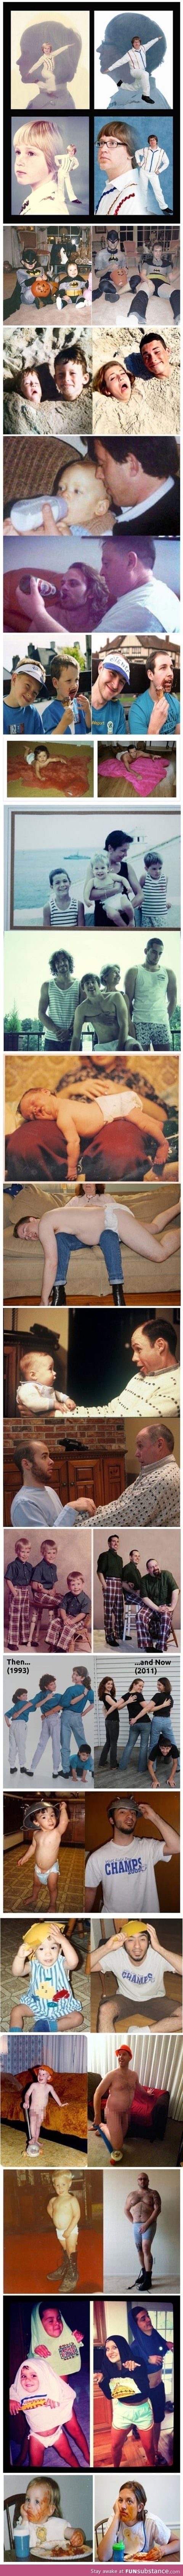 Photos recreated years later